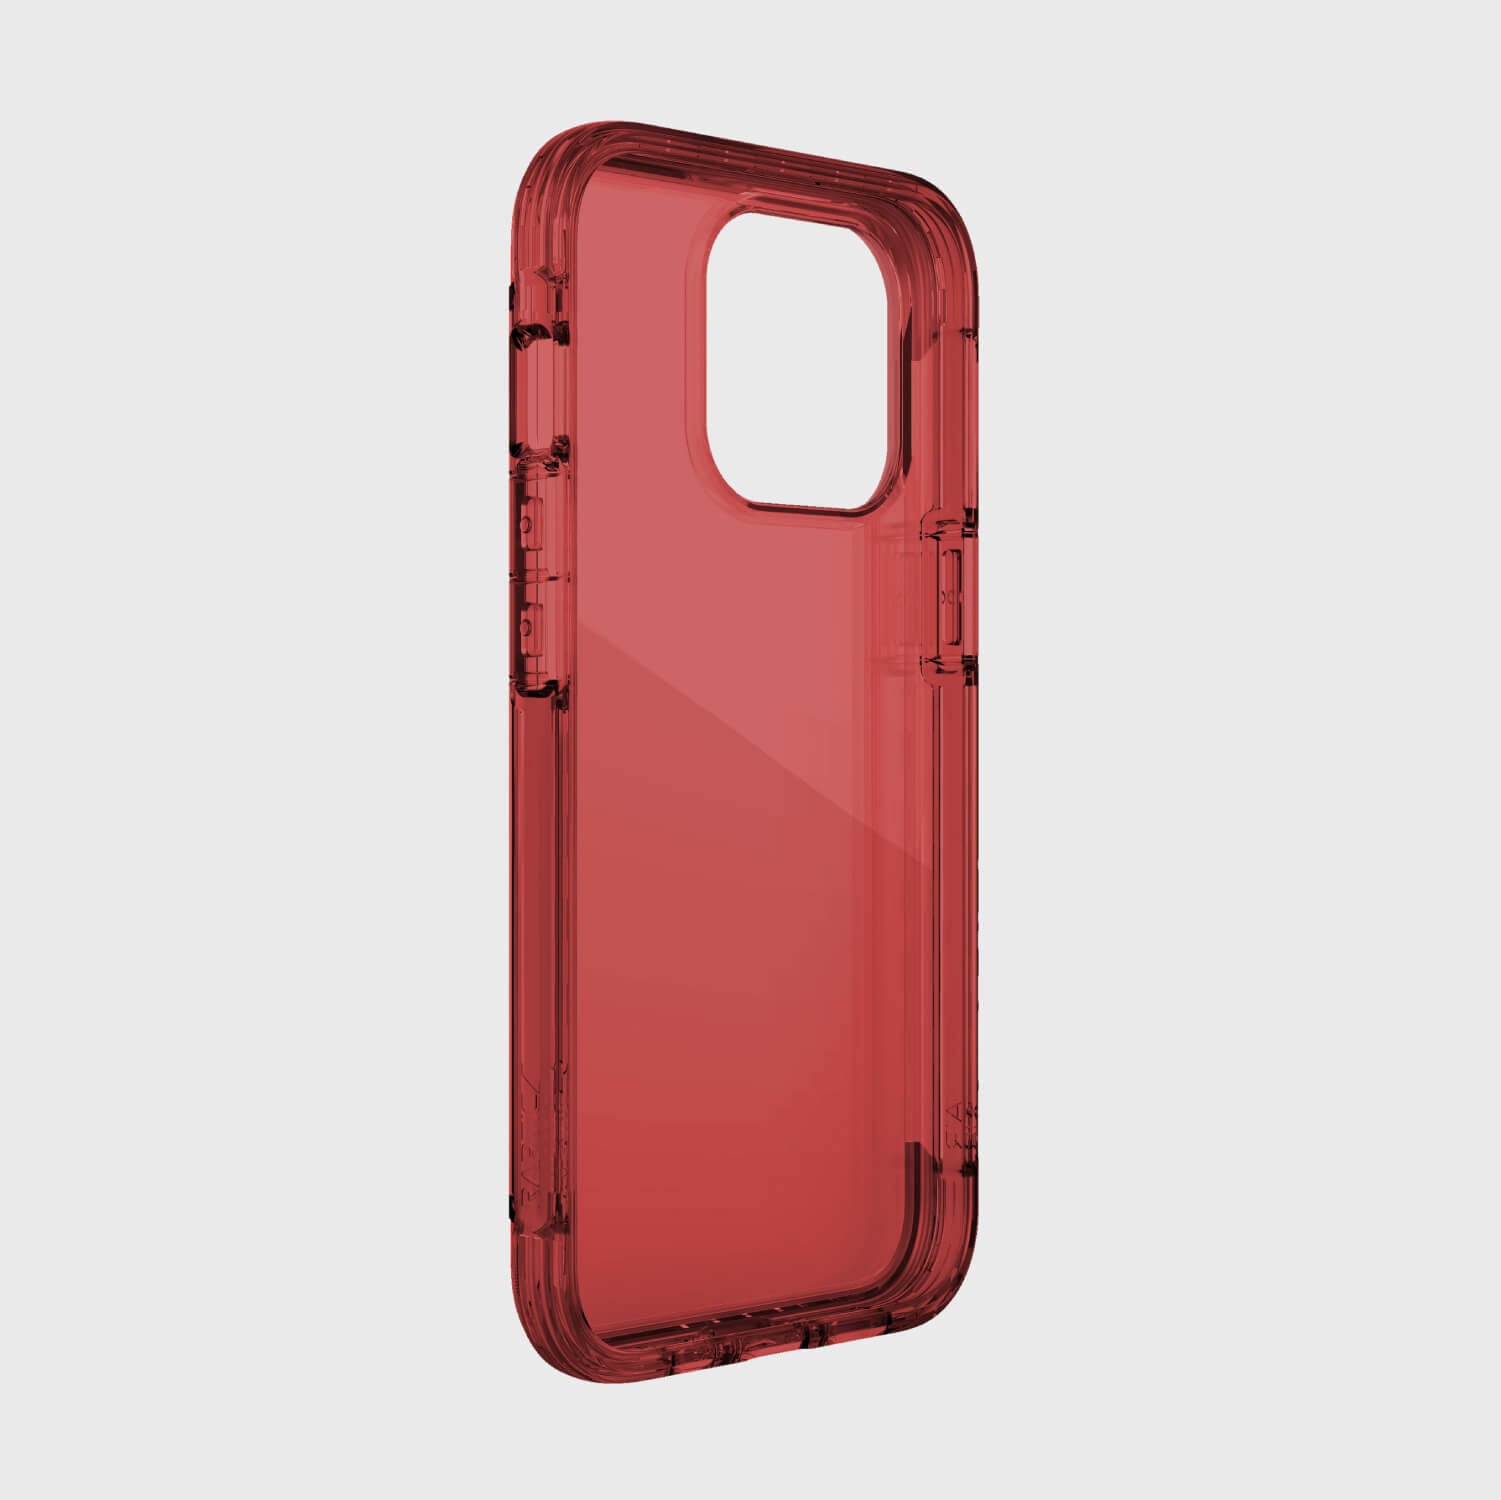 This Raptic iPhone 13 Pro Case - AIR not only offers sleek style with a white background, but also provides reliable drop protection up to 13 feet and is wireless charging compatible.